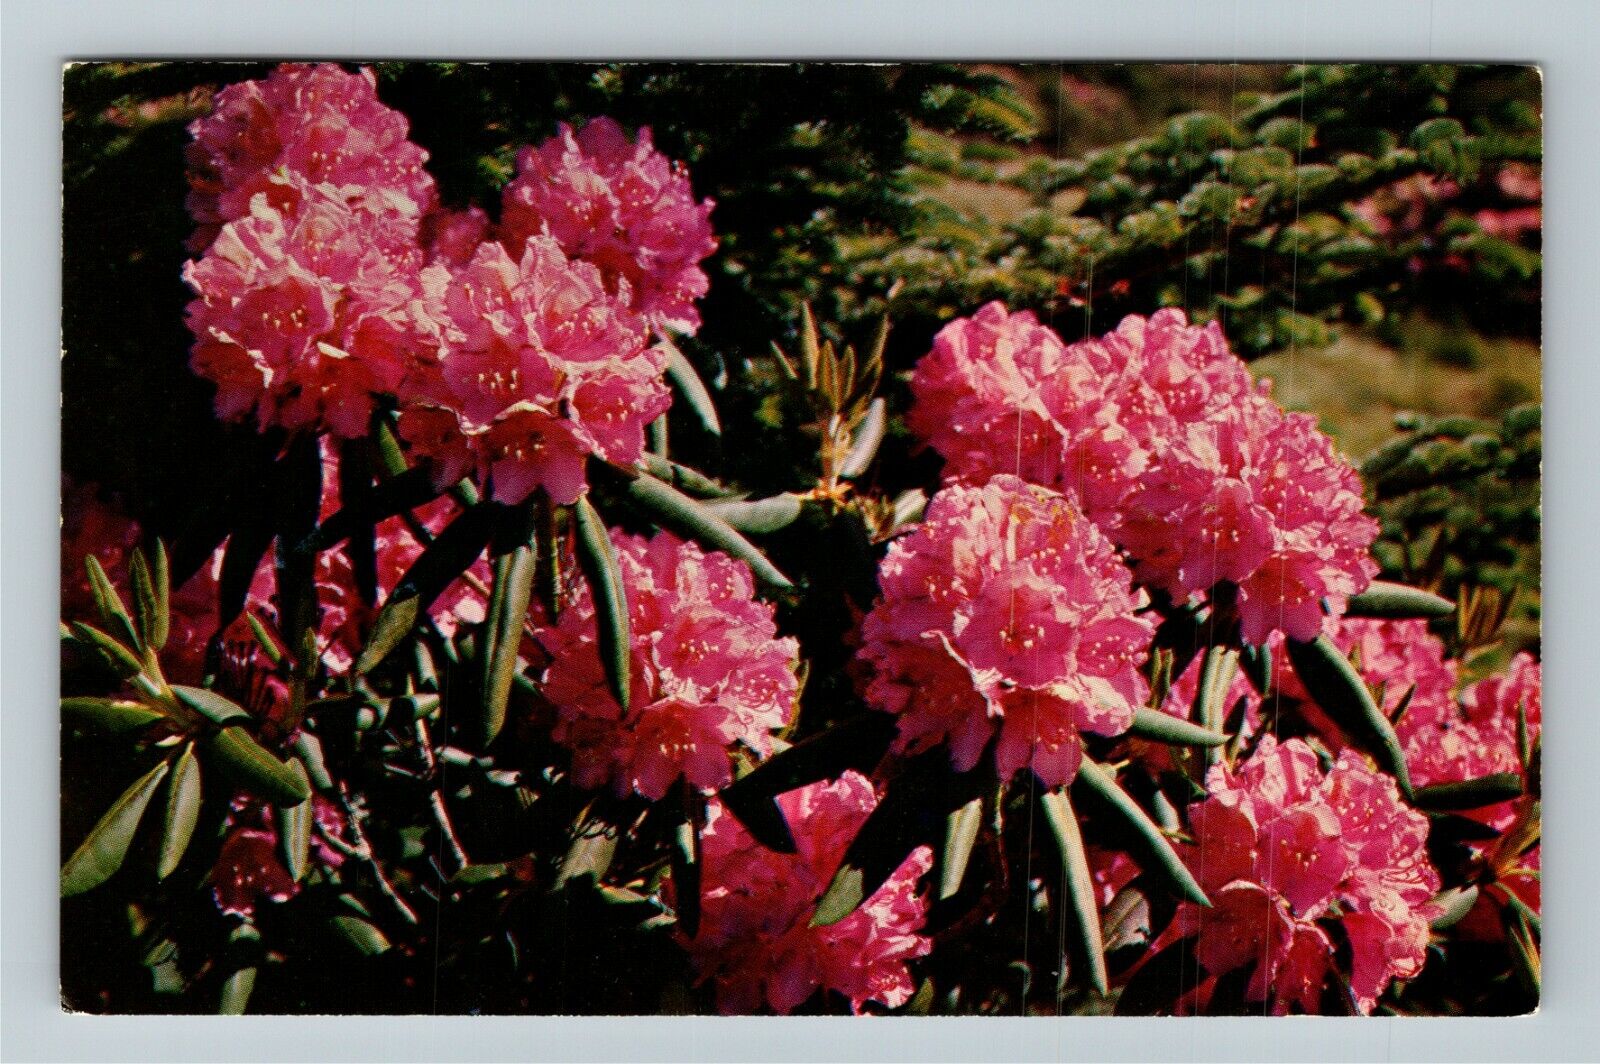 Purple Rhododendron, Scenic Nature Plants And Flowers Vintage Postcard